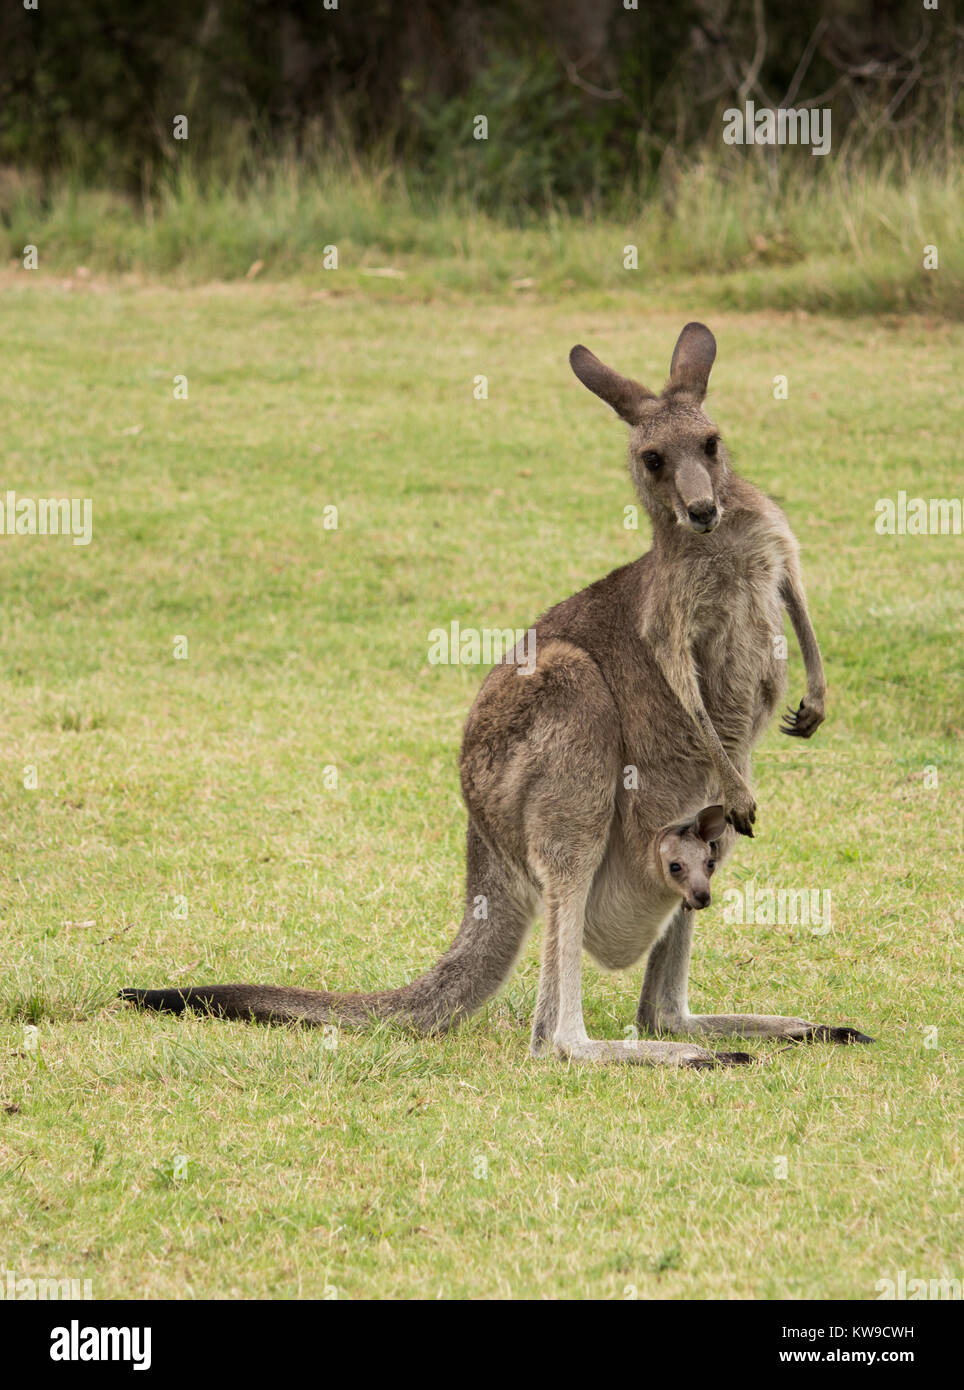 Australian native Kangaroo mother with baby joey in pouch standing in field Stock Photo